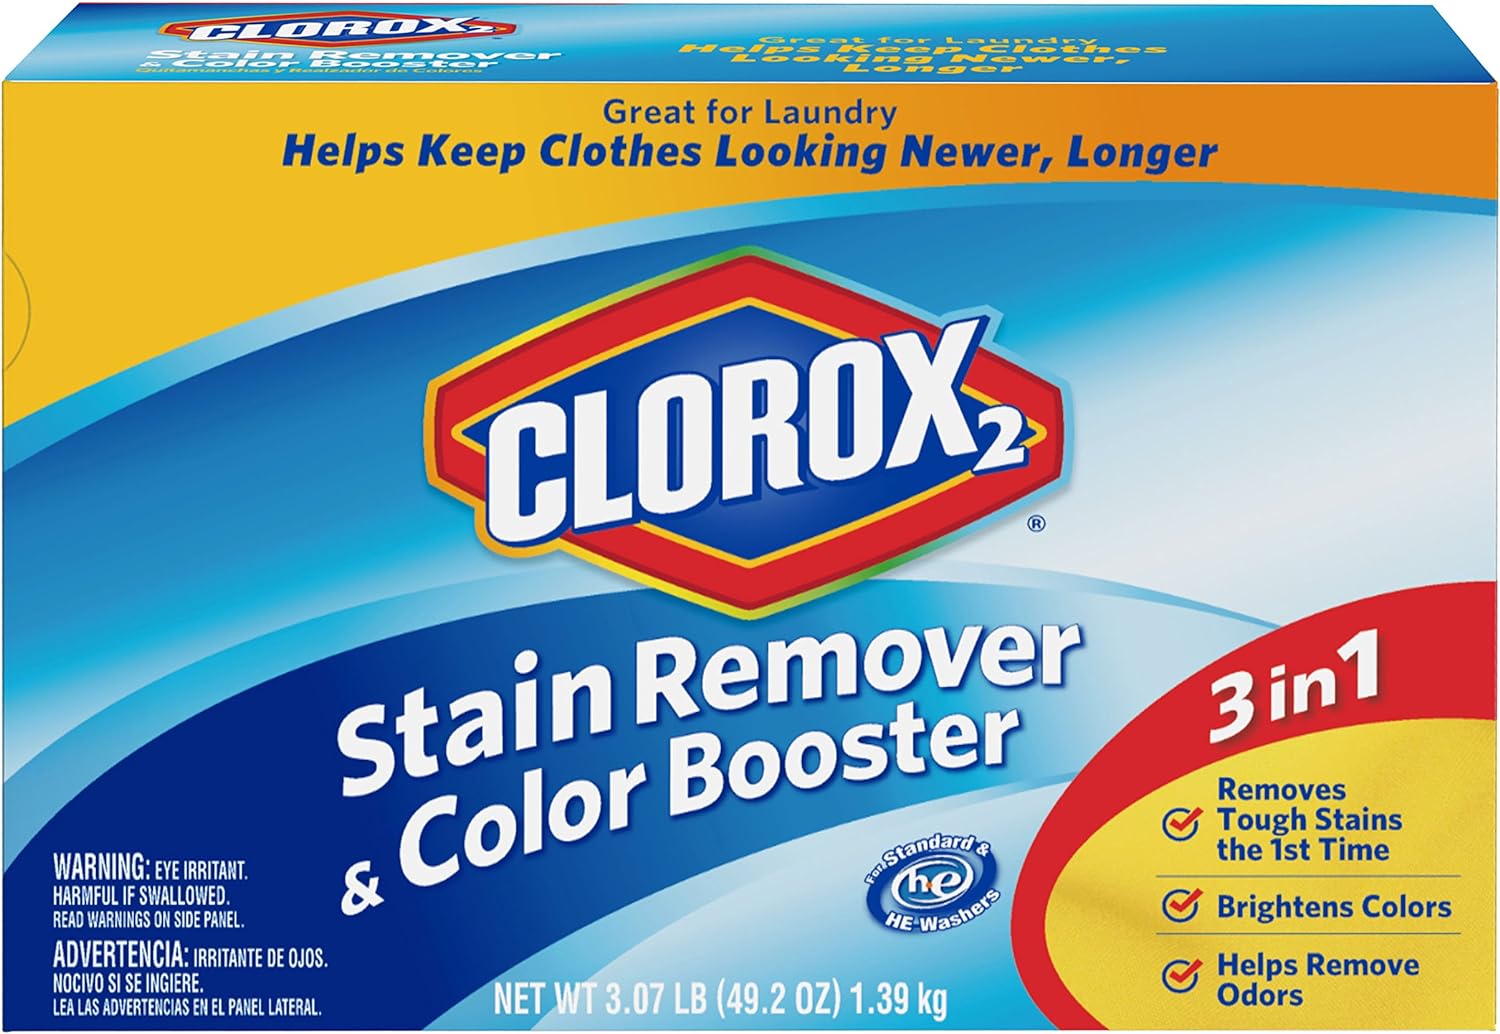 Clorox 2 Laundry Stain Remover and Color Booster Powder, 49.2 Ounce : Health & Household